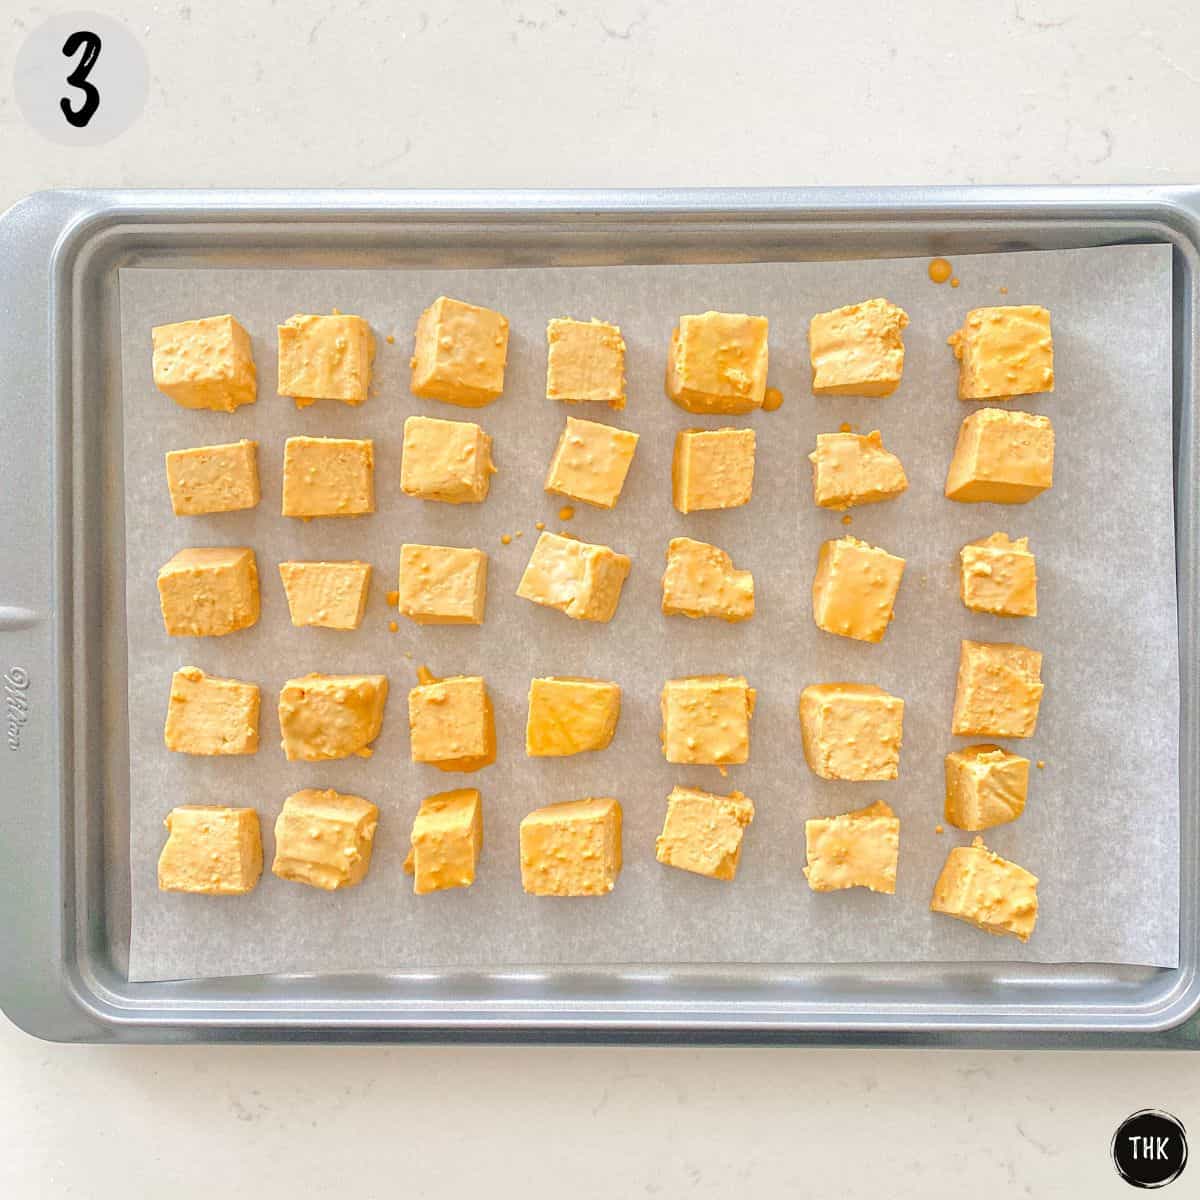 Marinated tofu cubes in a single layer on baking sheet.